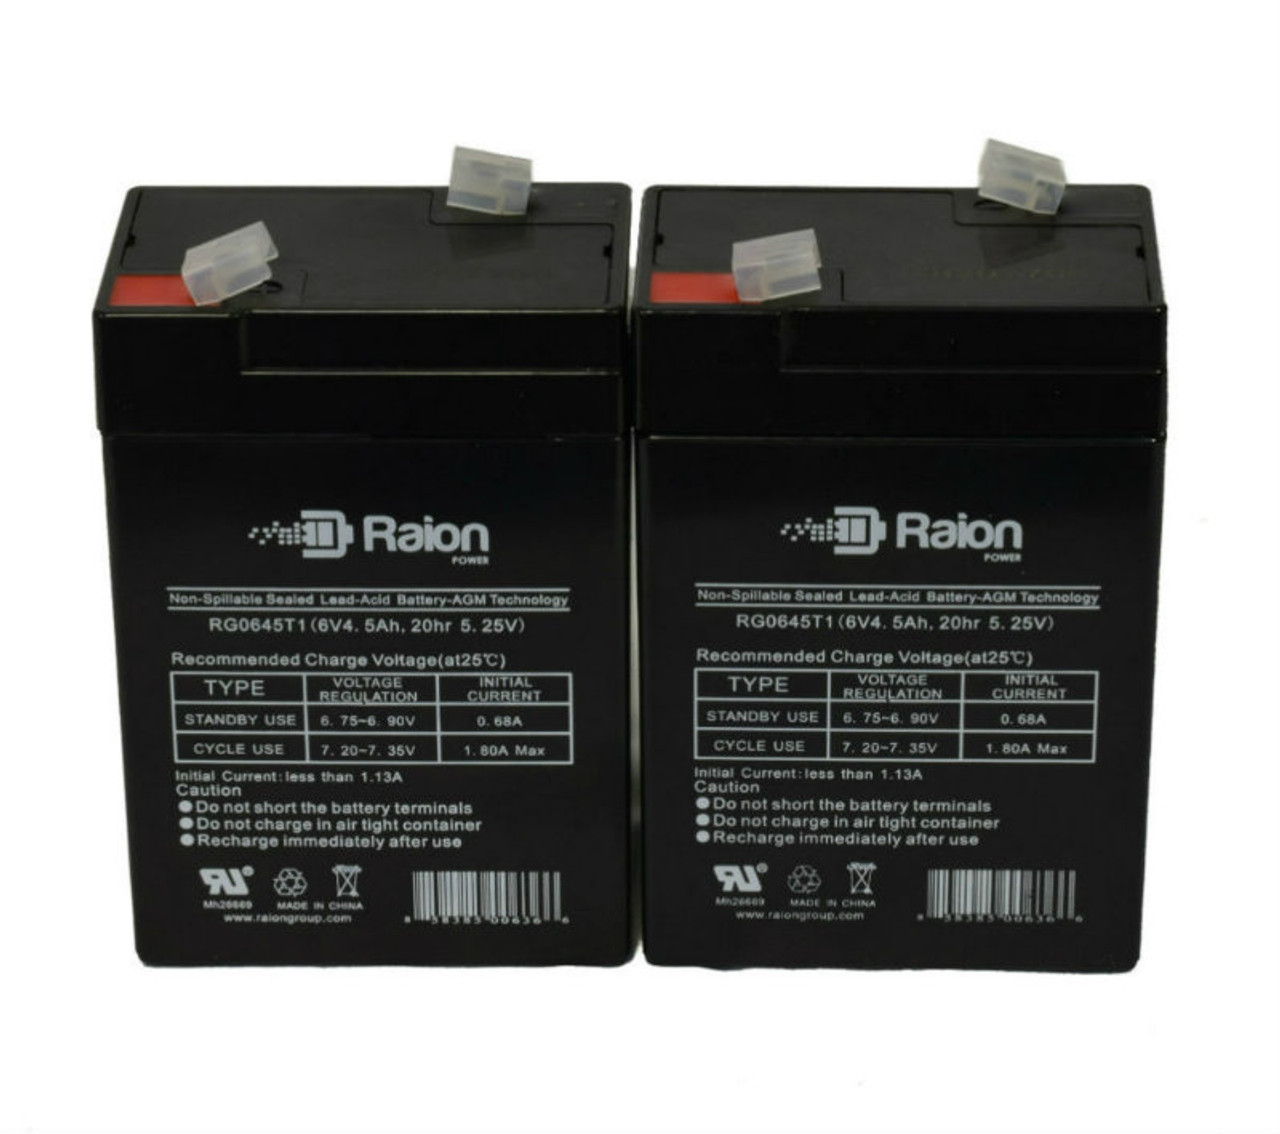 Raion Power 6 Volt 4.5Ah RG0645T1 Replacement Battery for Kweight Power KW 6-4.5 - 2 Pack